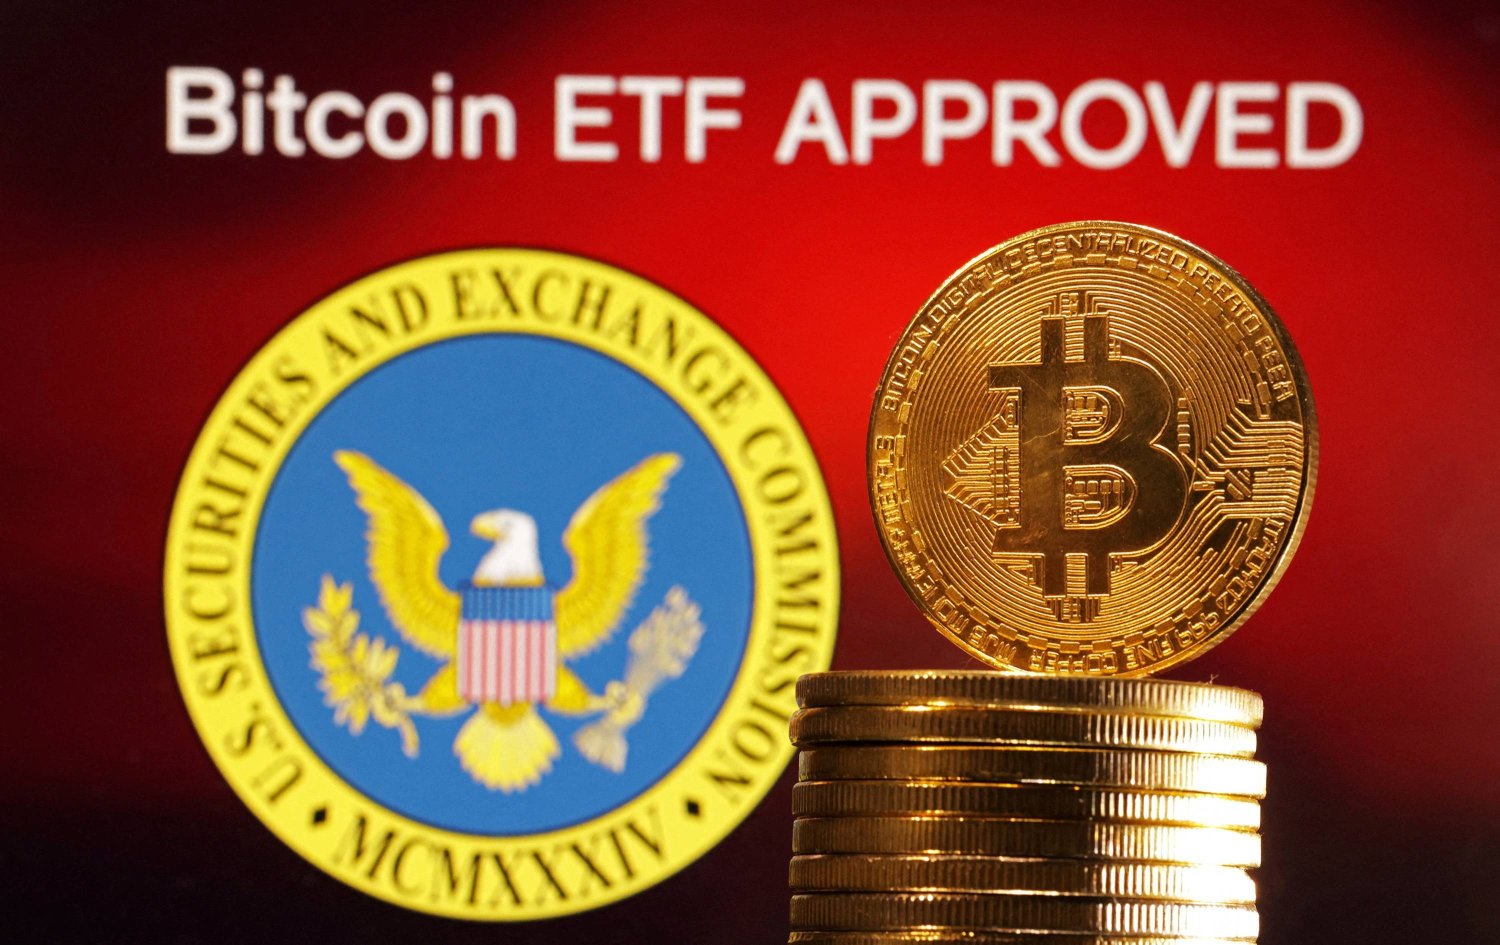 The logo of the US Securities and Exchange Commission and Bitcoin with the words “Approval of Exchange-Traded Funds” (Reuters)